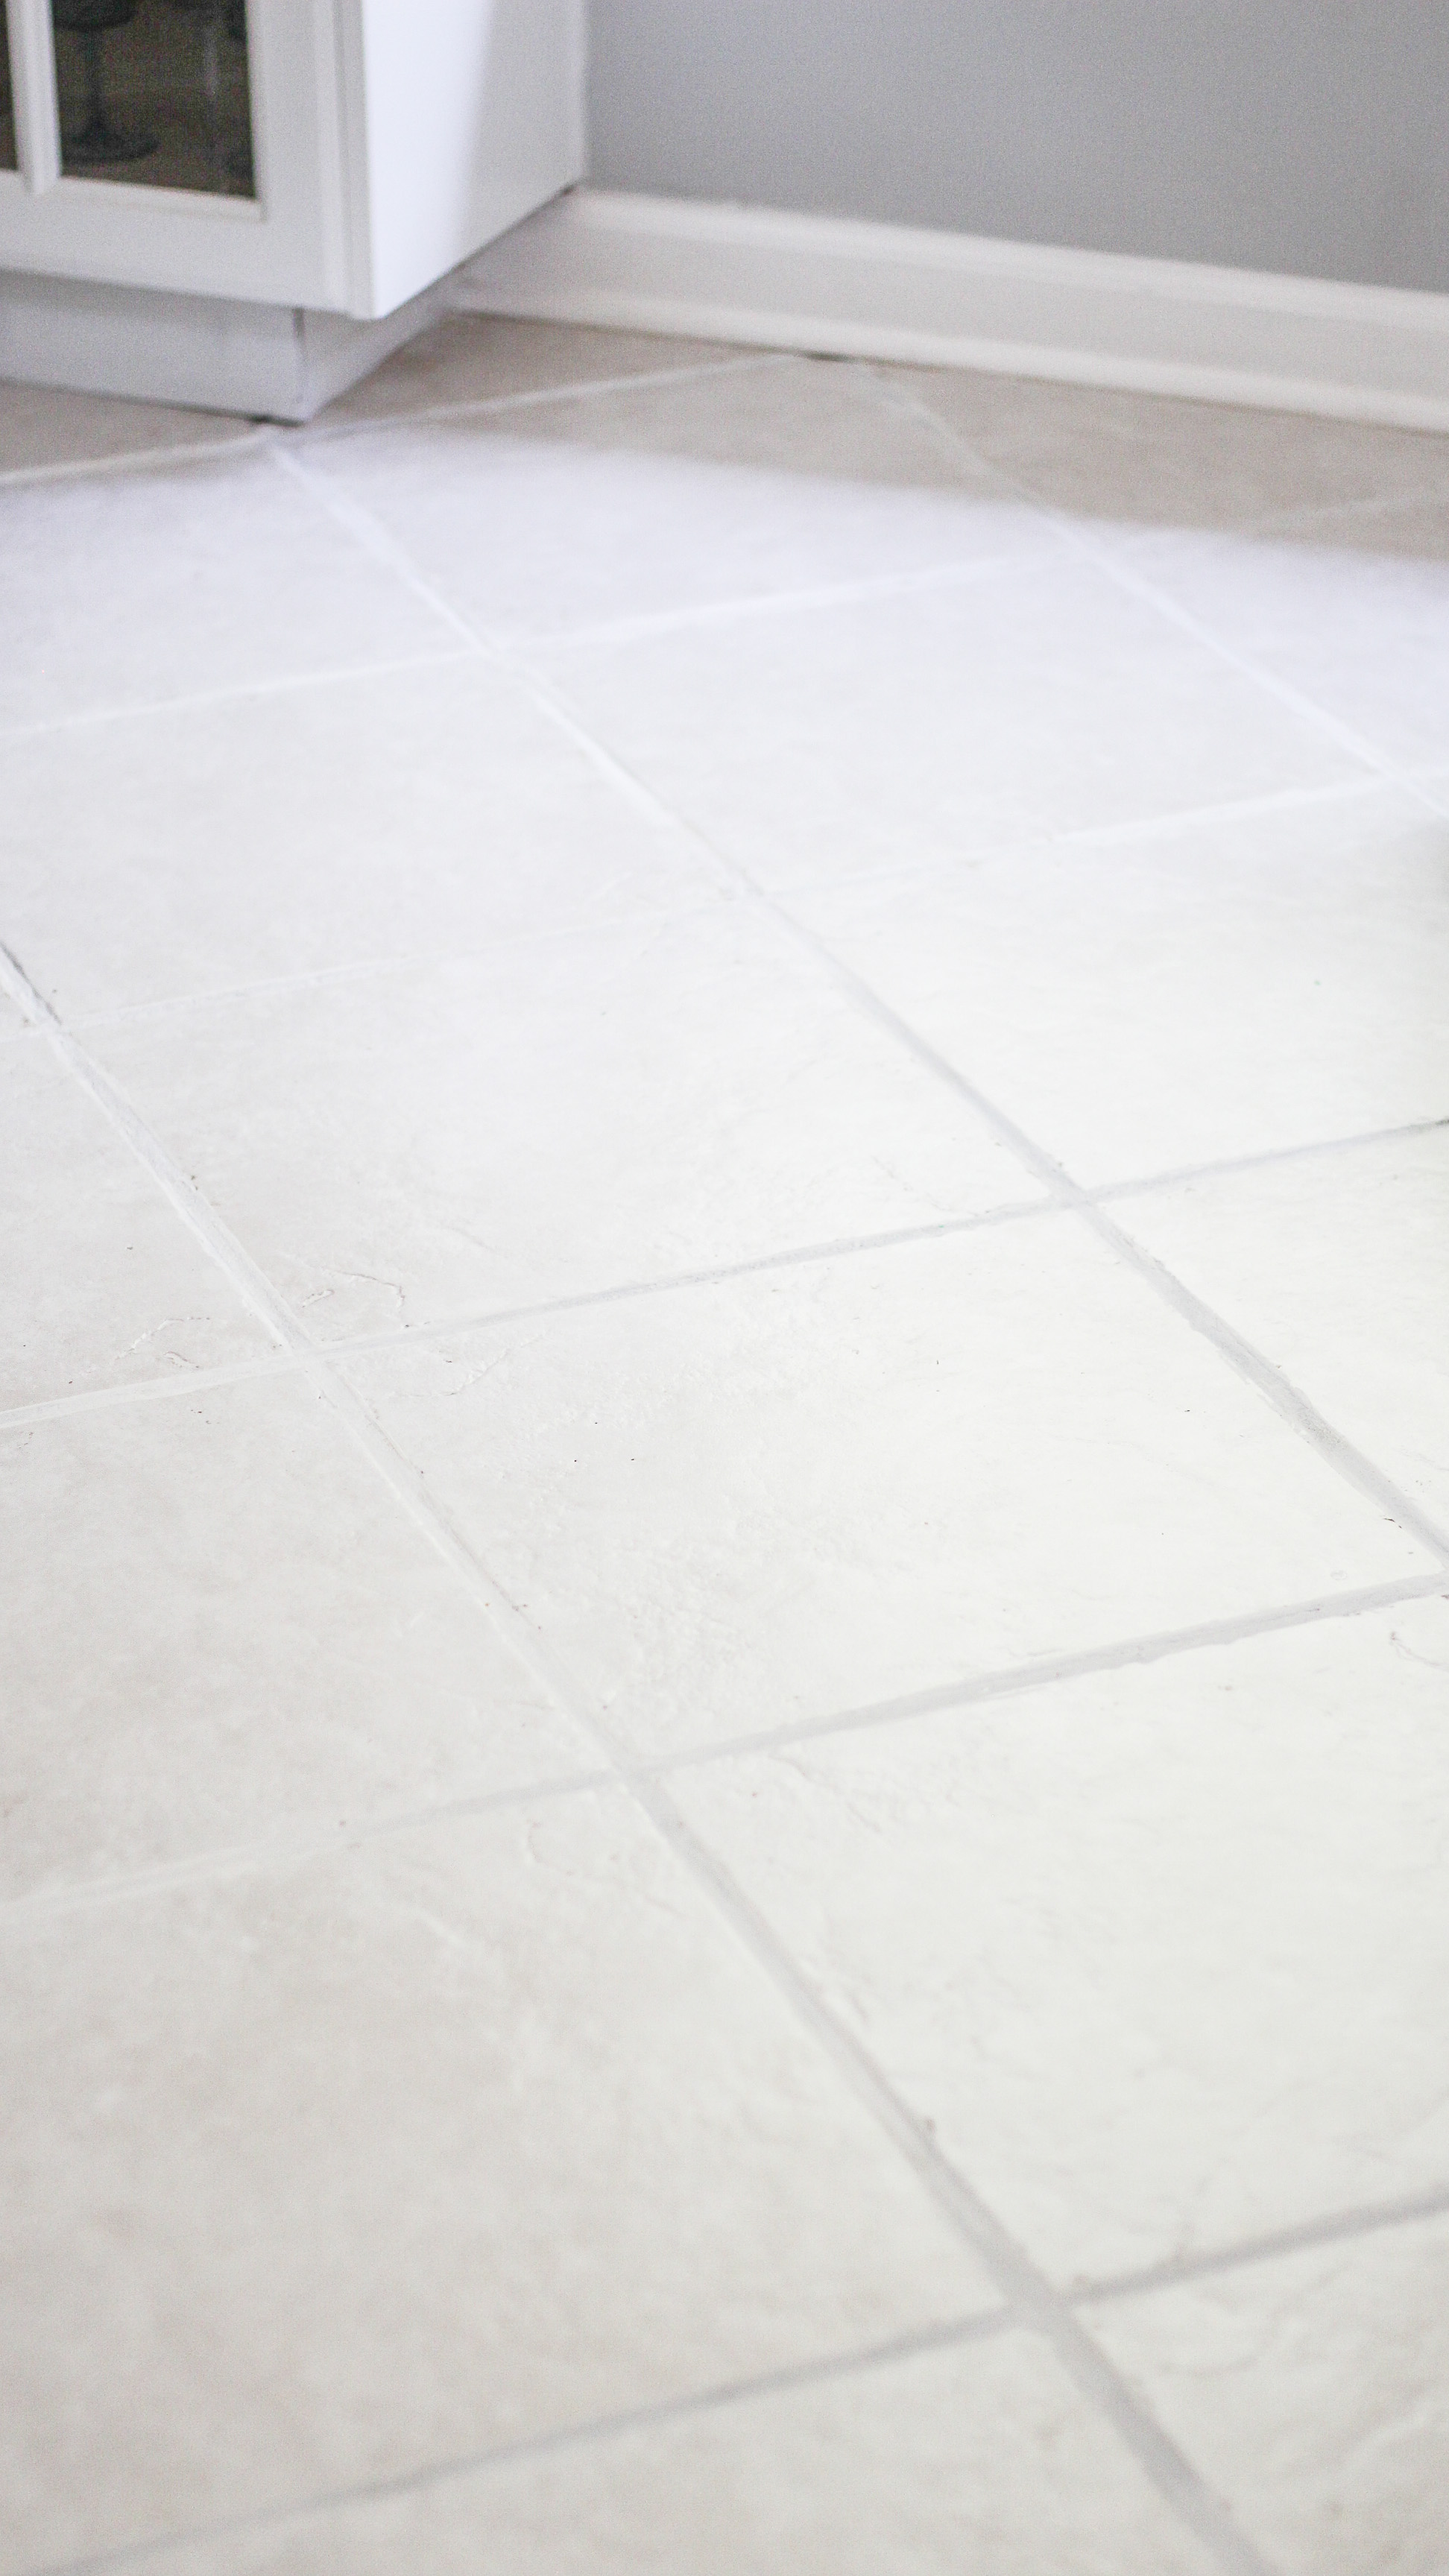 Neglected Tile Flooring, How To Clean Dirty Floor Tiles